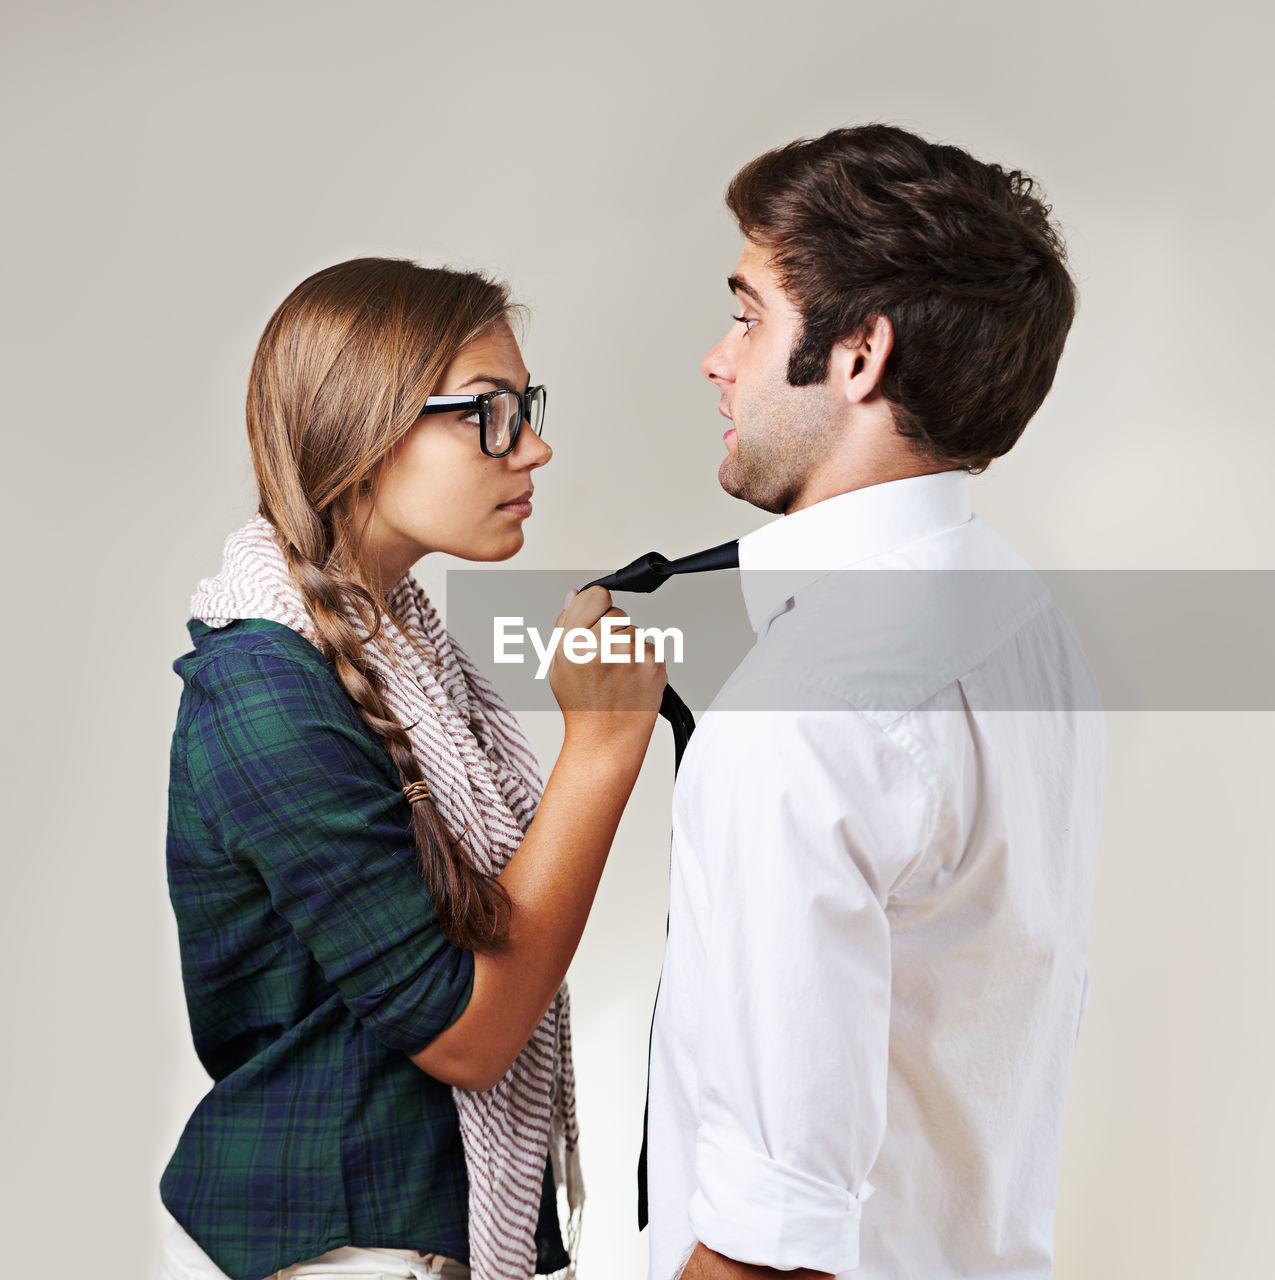 two people, adult, women, indoors, men, photo shoot, young adult, studio shot, clothing, person, emotion, togetherness, female, positive emotion, casual clothing, waist up, standing, glasses, love, side view, fashion, business, human face, eyeglasses